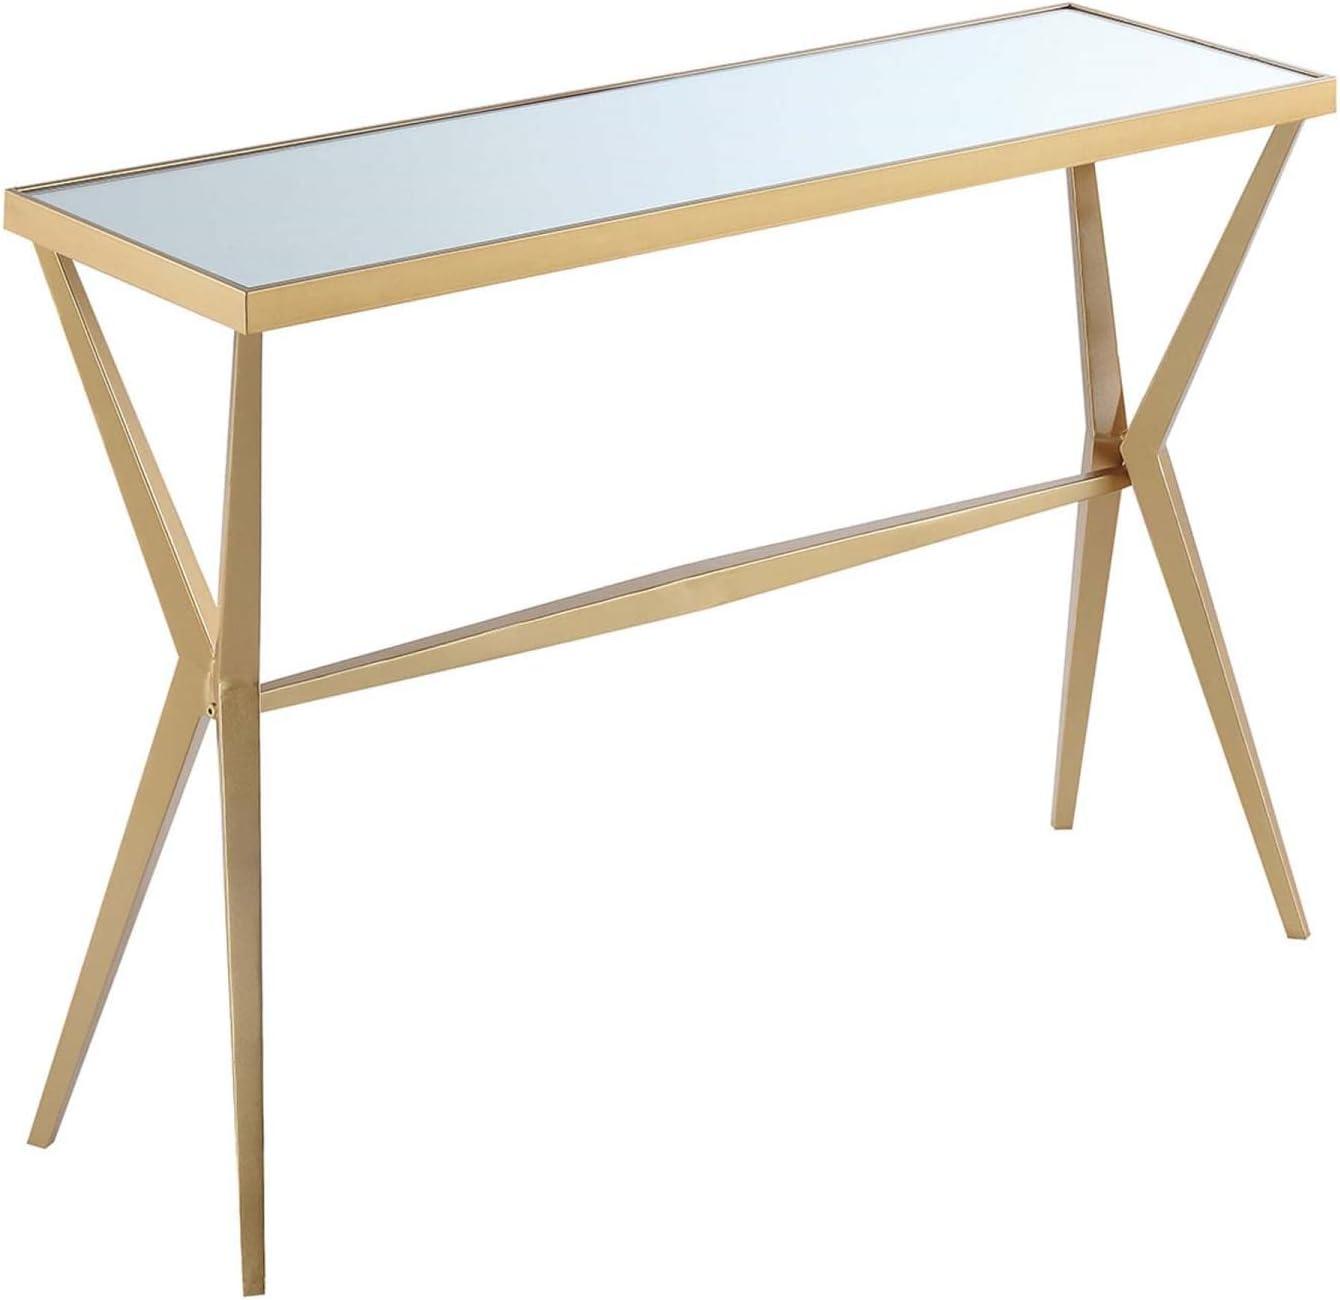 Gold Mirrored Metal Console Table with Storage, 42 in